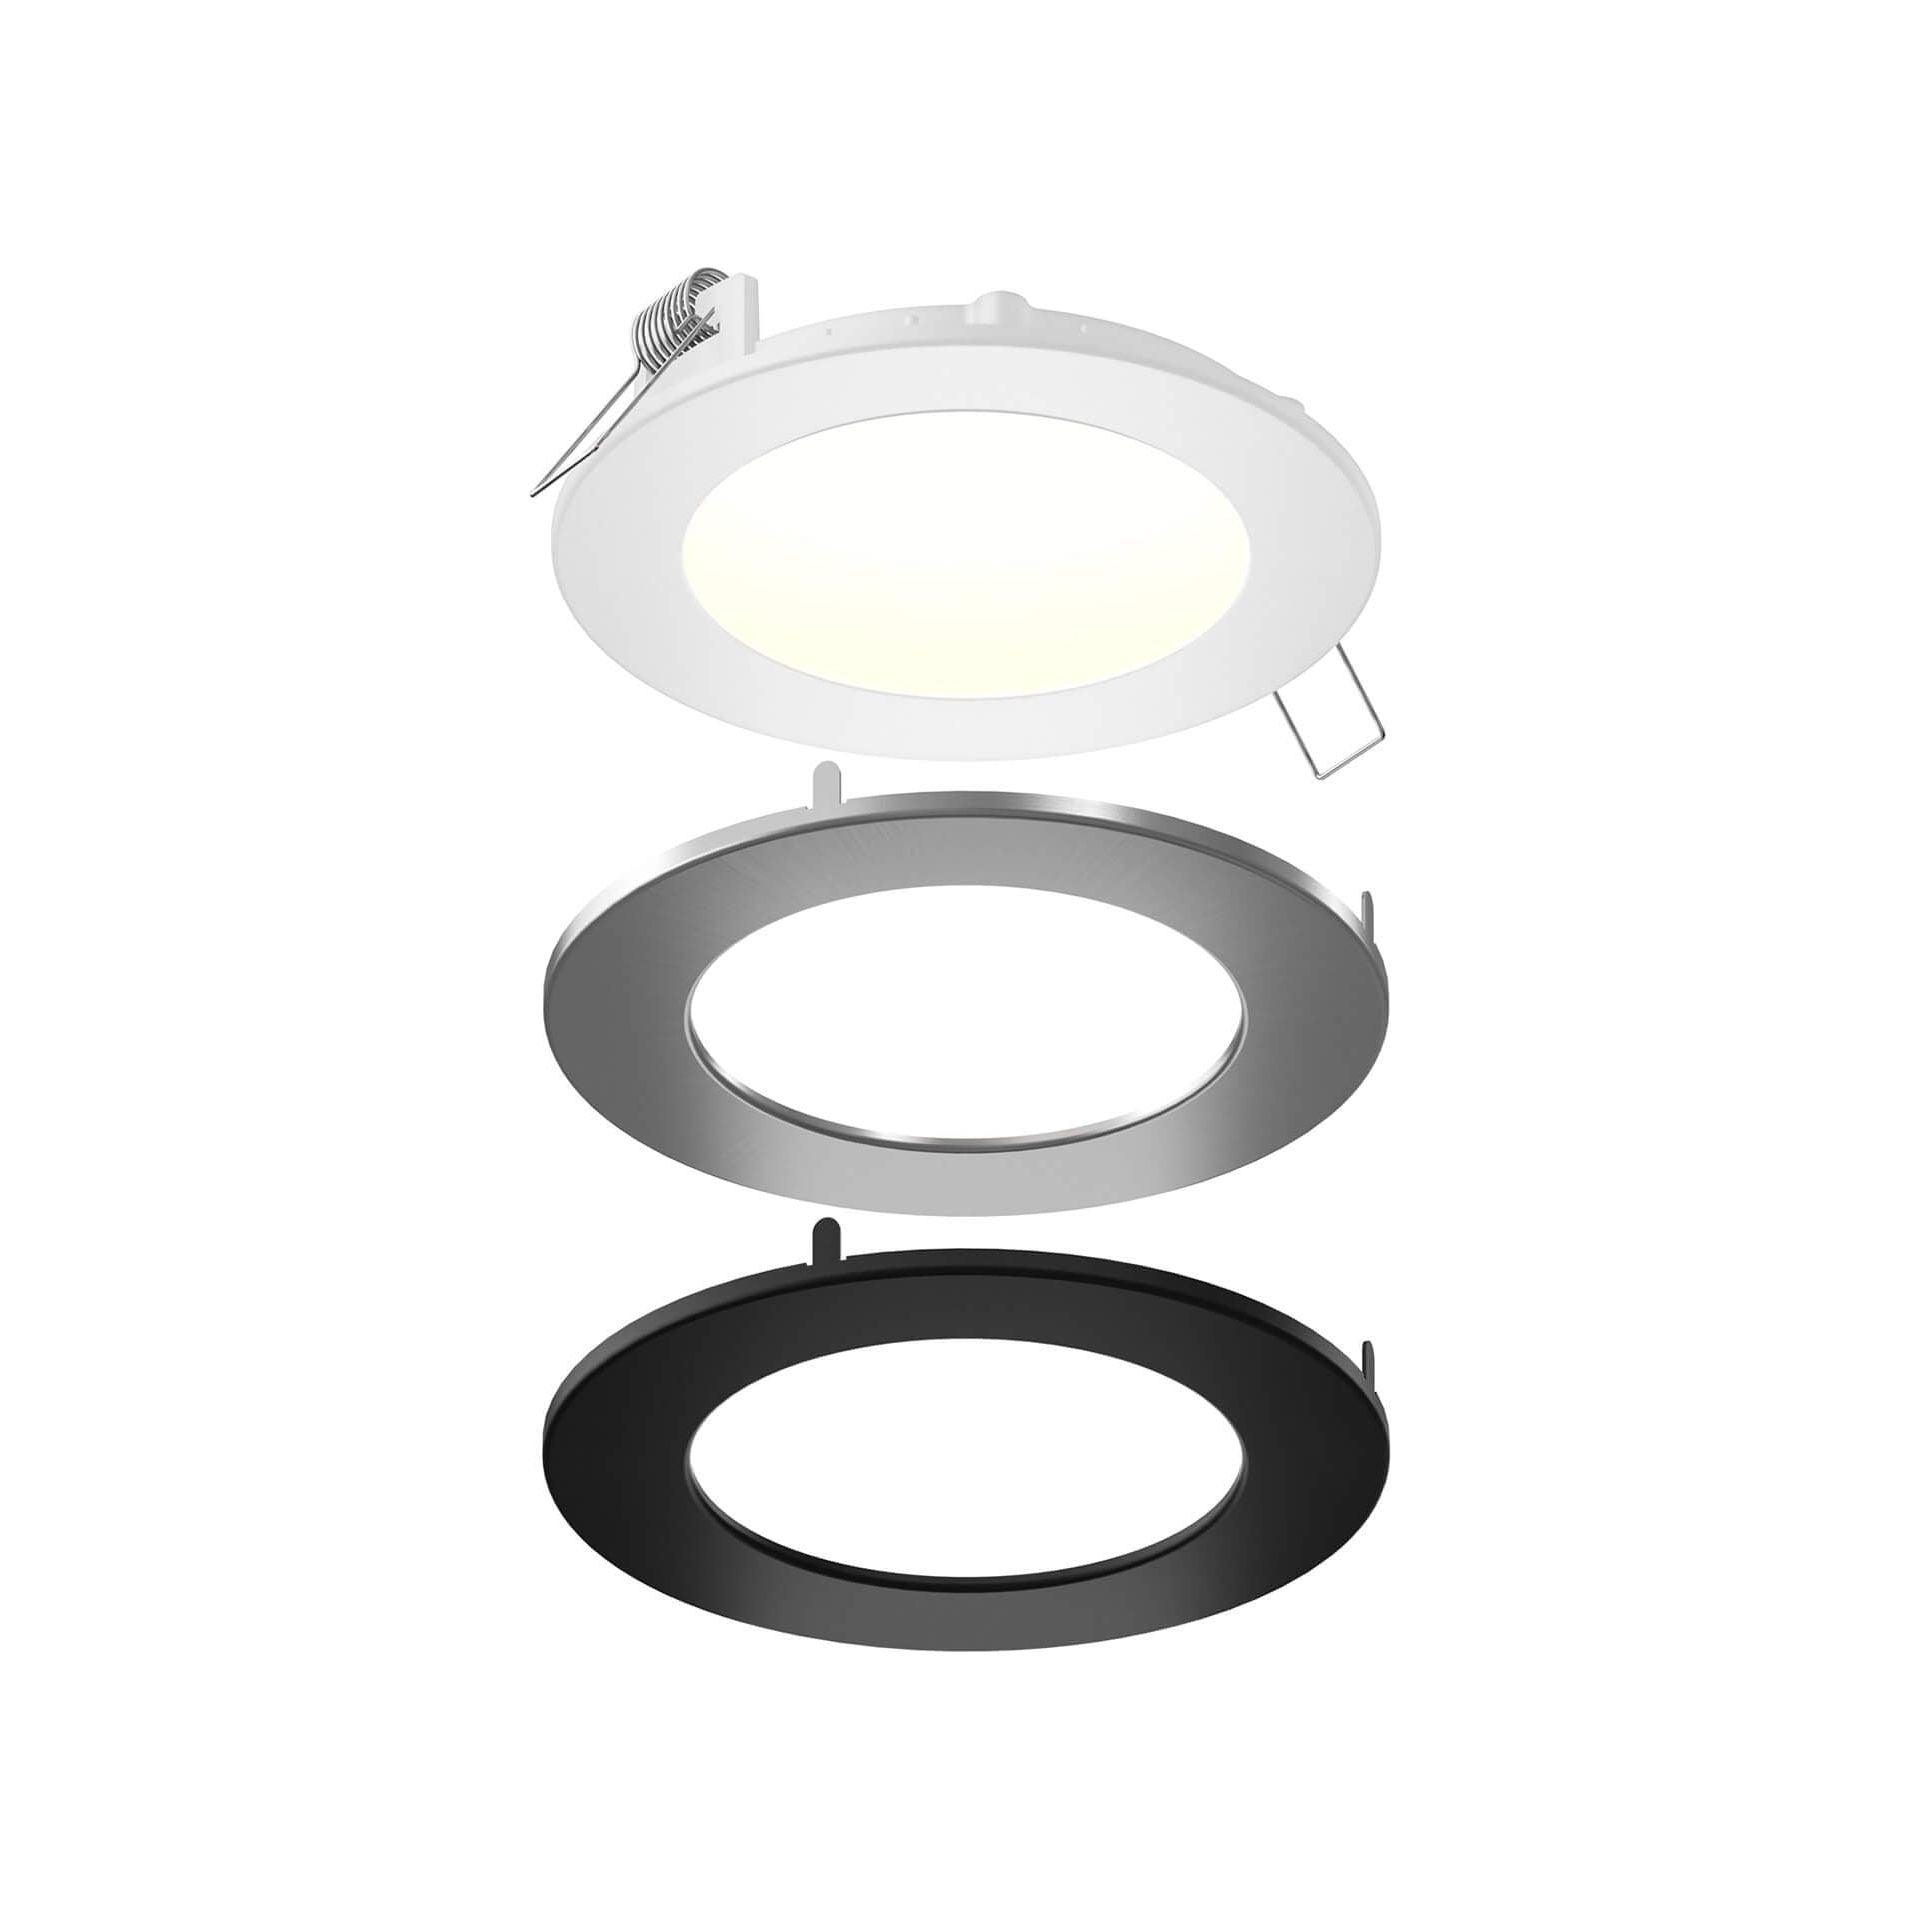 DALS - Round Led Recessed Panel Light With Multi Trim - Lights Canada